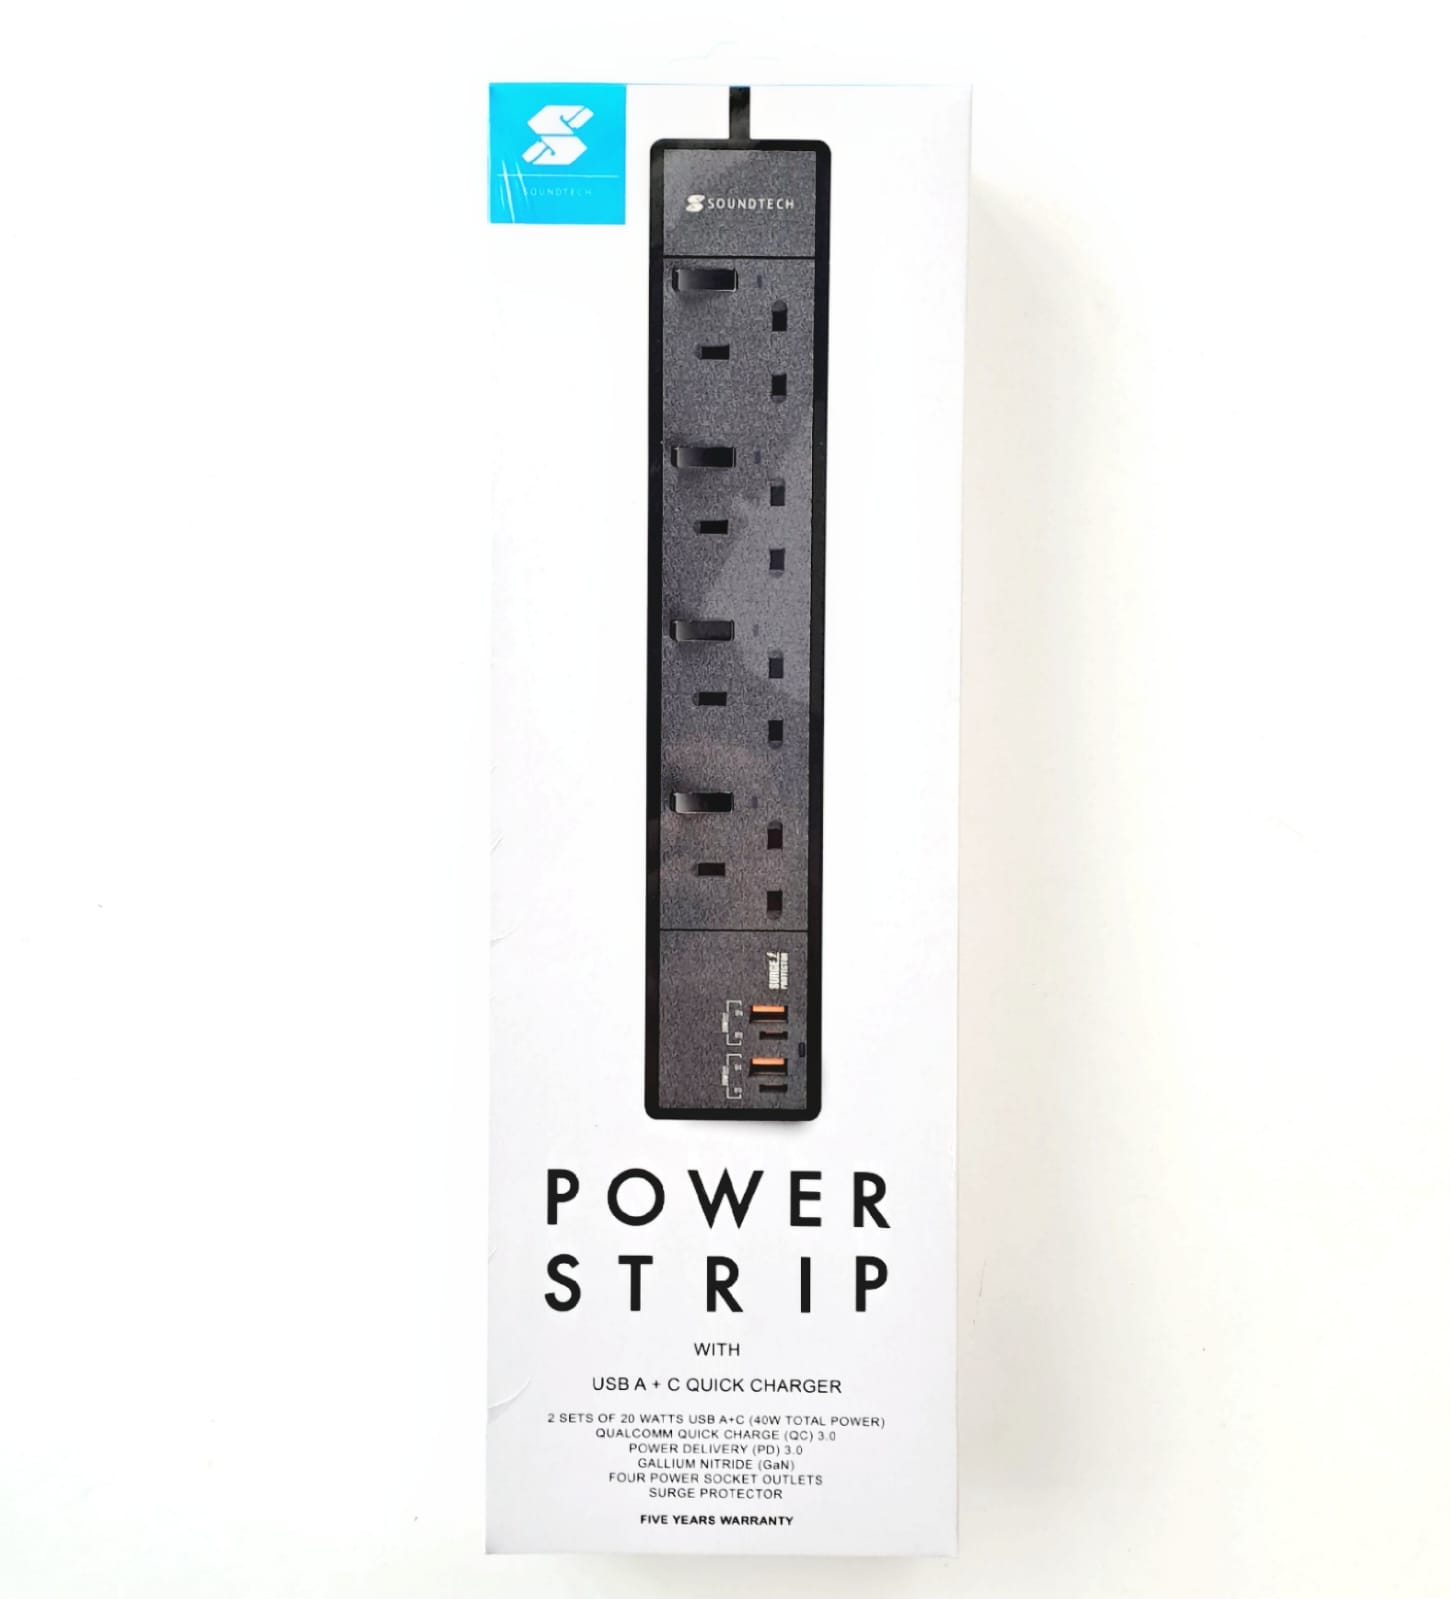 Soundtech 4 Way Power Strip with 2 sets of 20Watts USB A+C Quick Charger